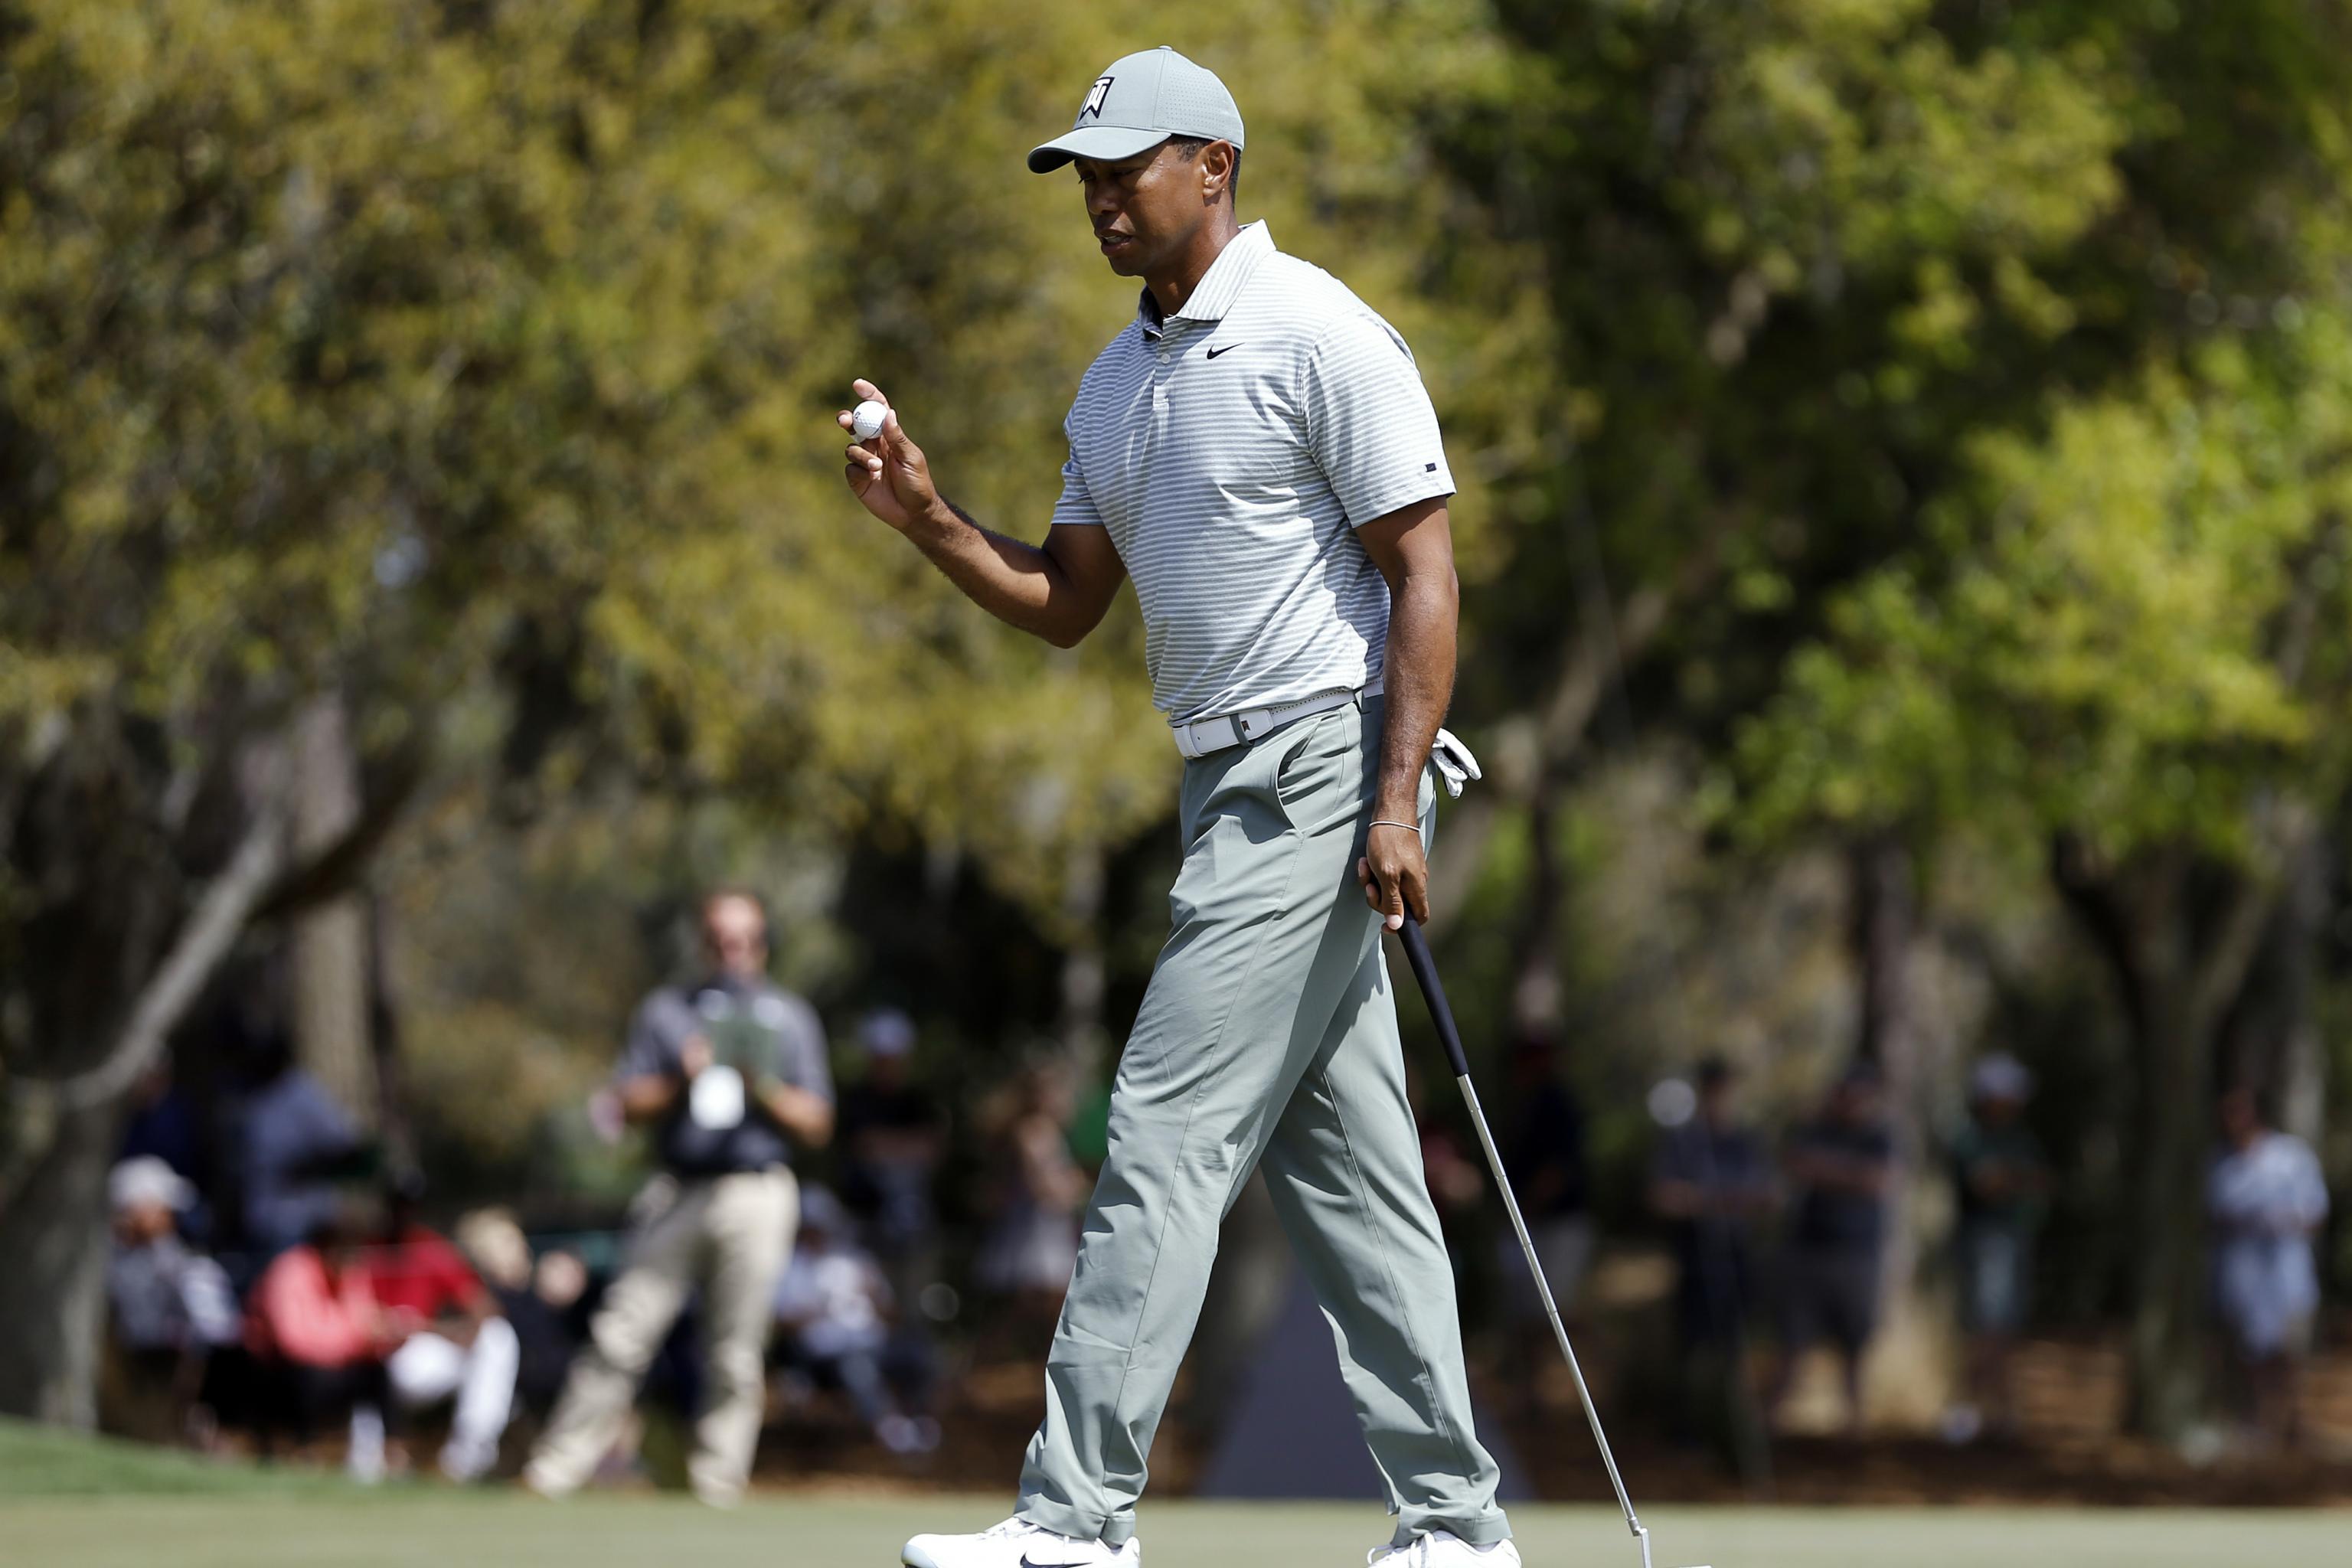 Tiger Woods Starts Strong Shoots 2 Under At 2019 Players Championship Round 1 Bleacher Report Latest News Videos And Highlights